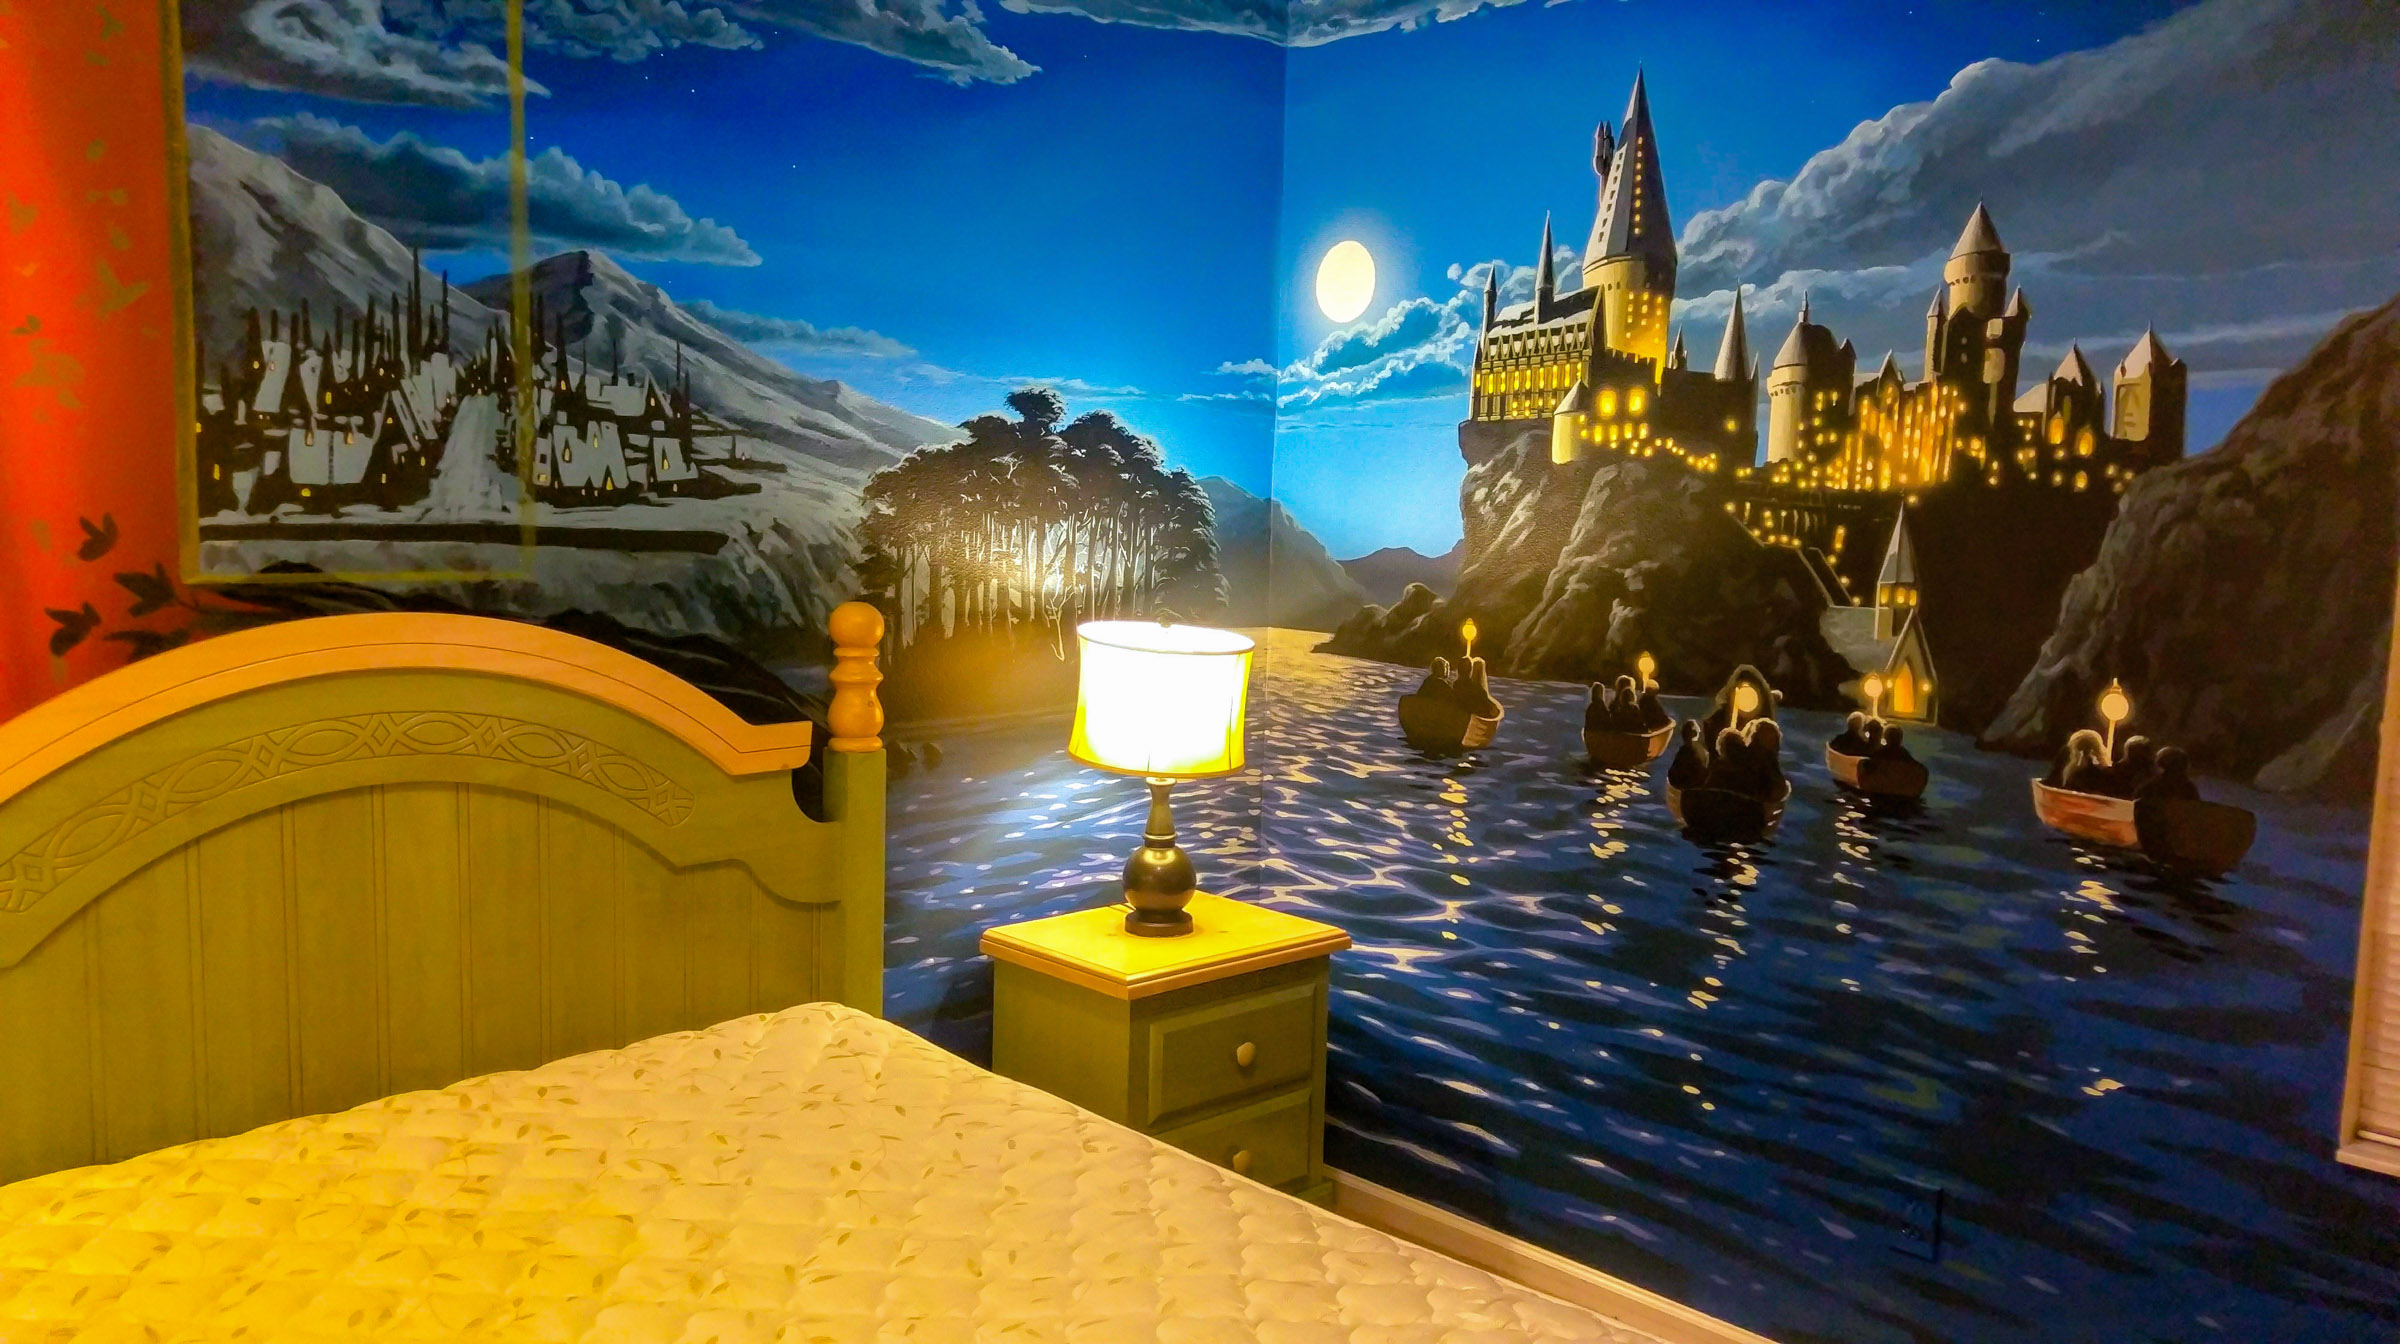 Harry Potter Bedroom in Florida USA